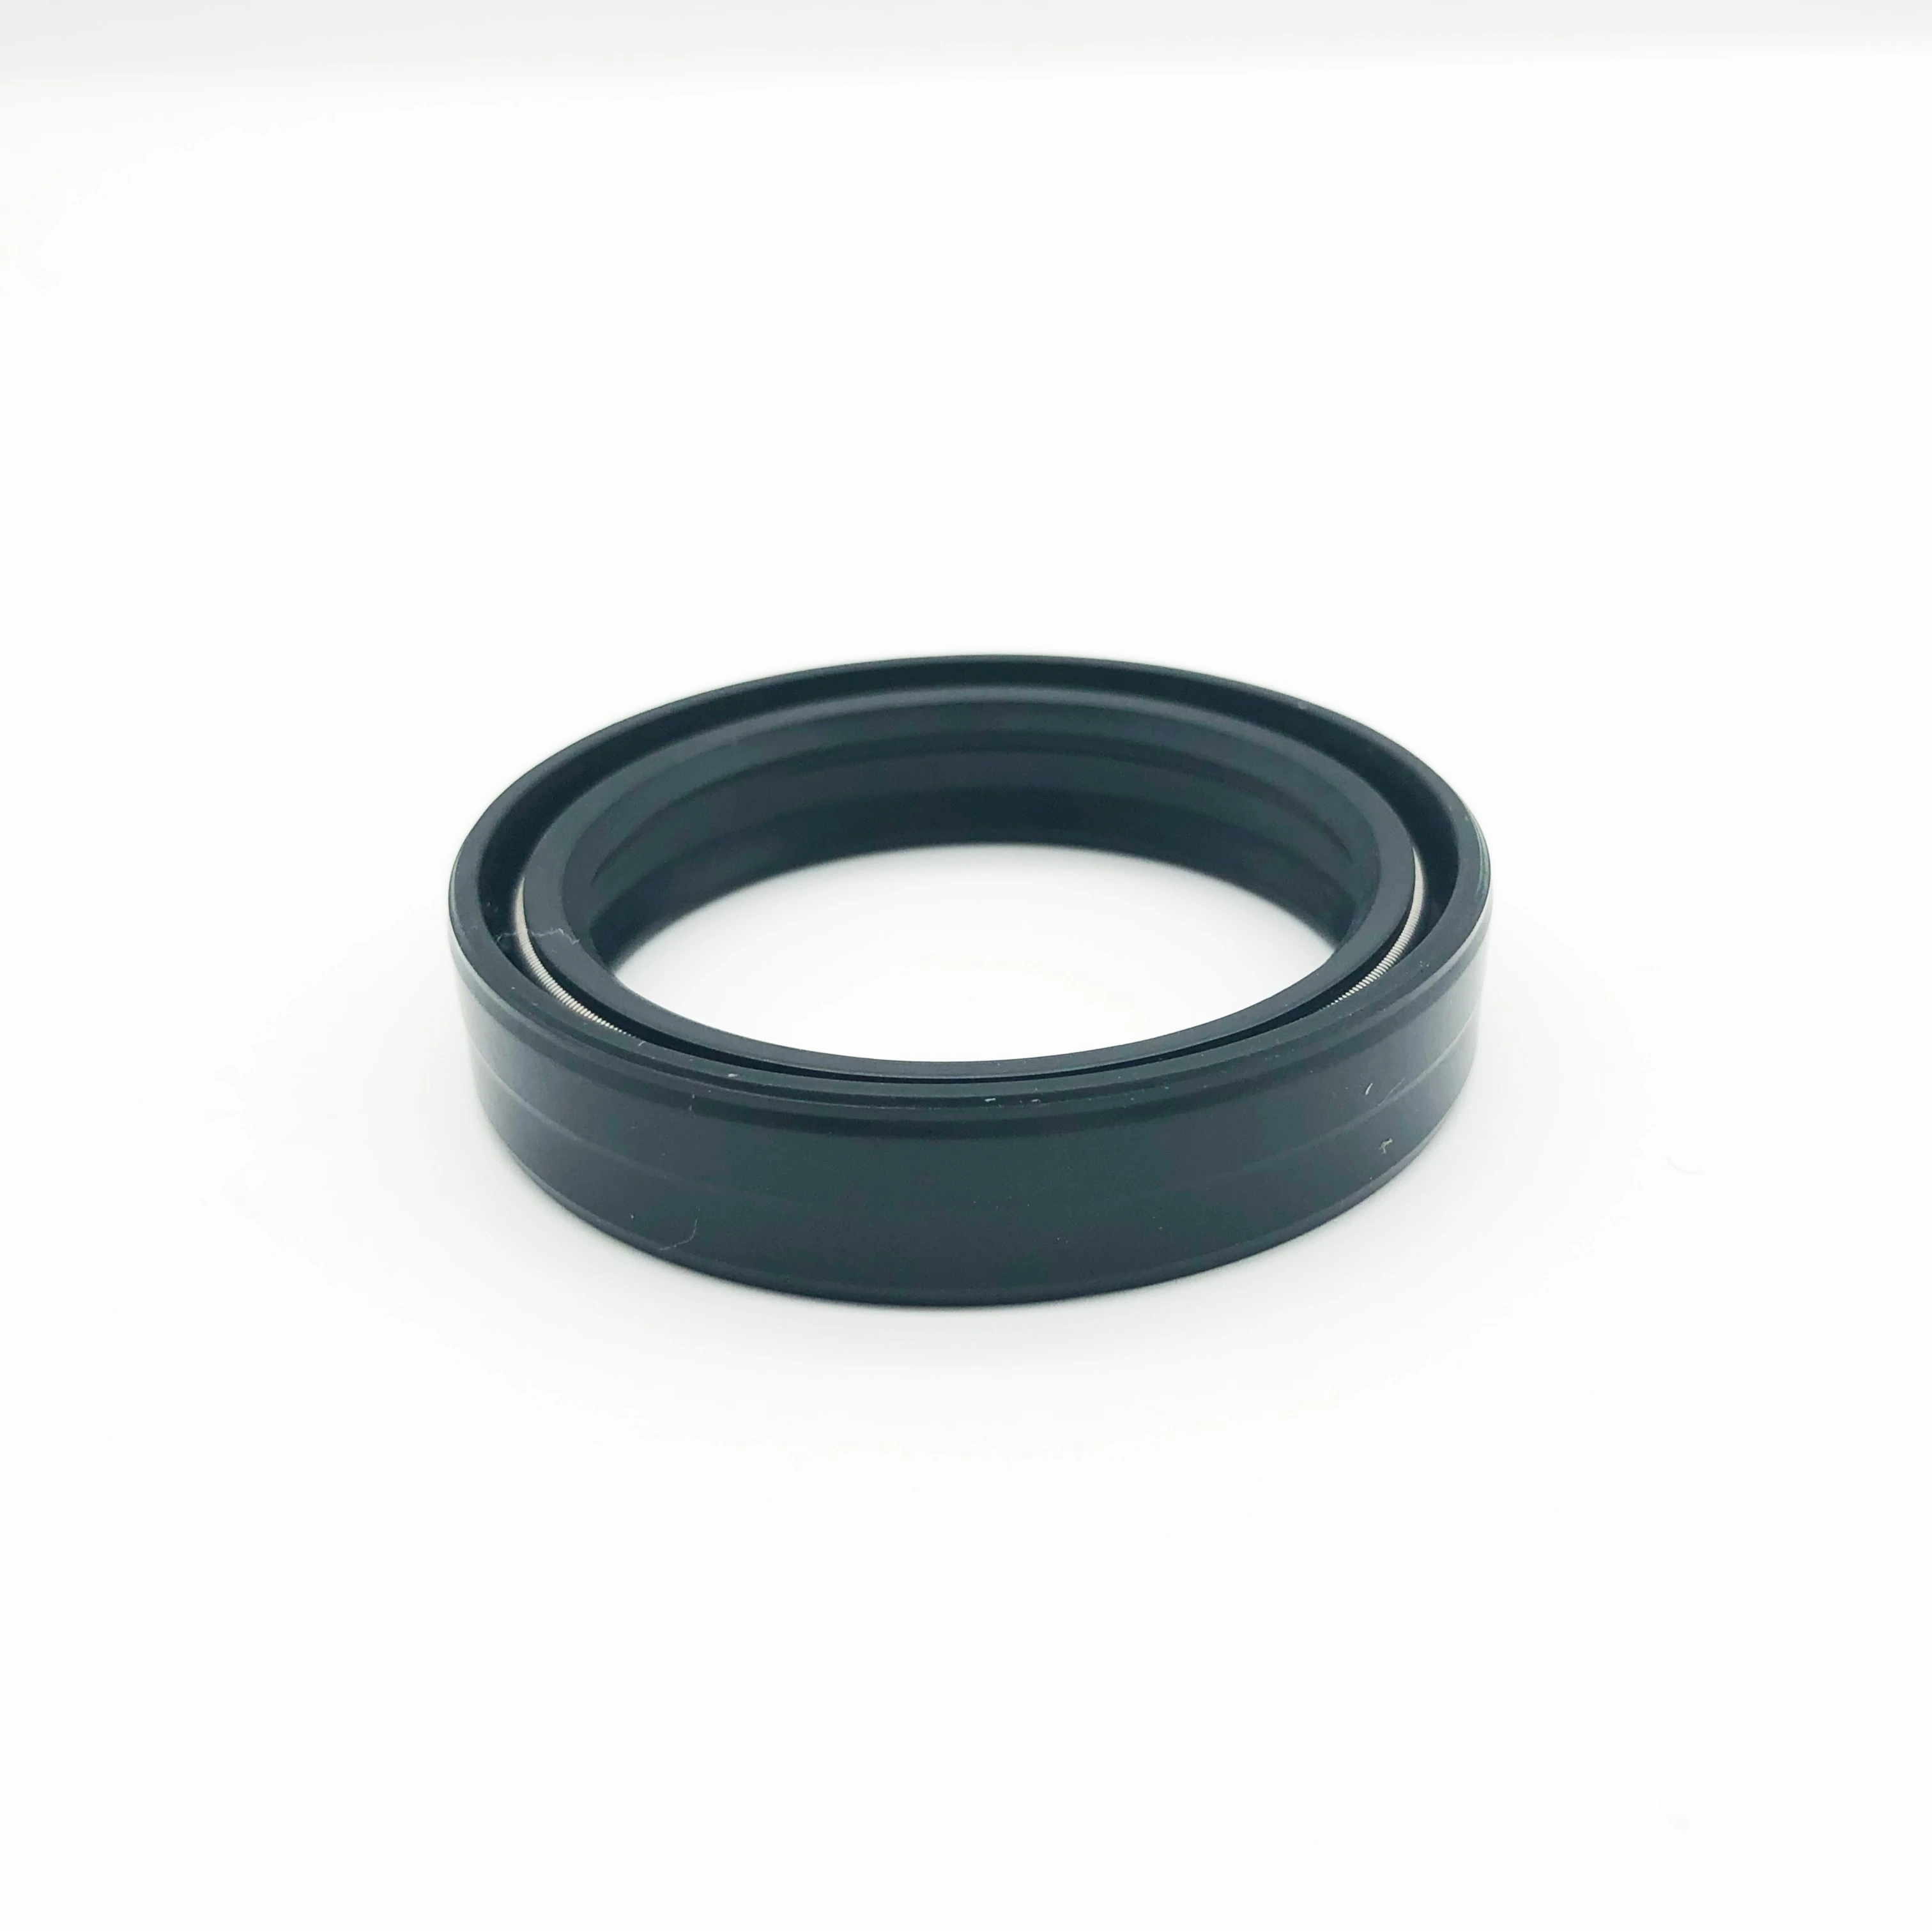 DC oil seals with spring retainer 54*43*11 mm rod Rubber seal Rubber Part